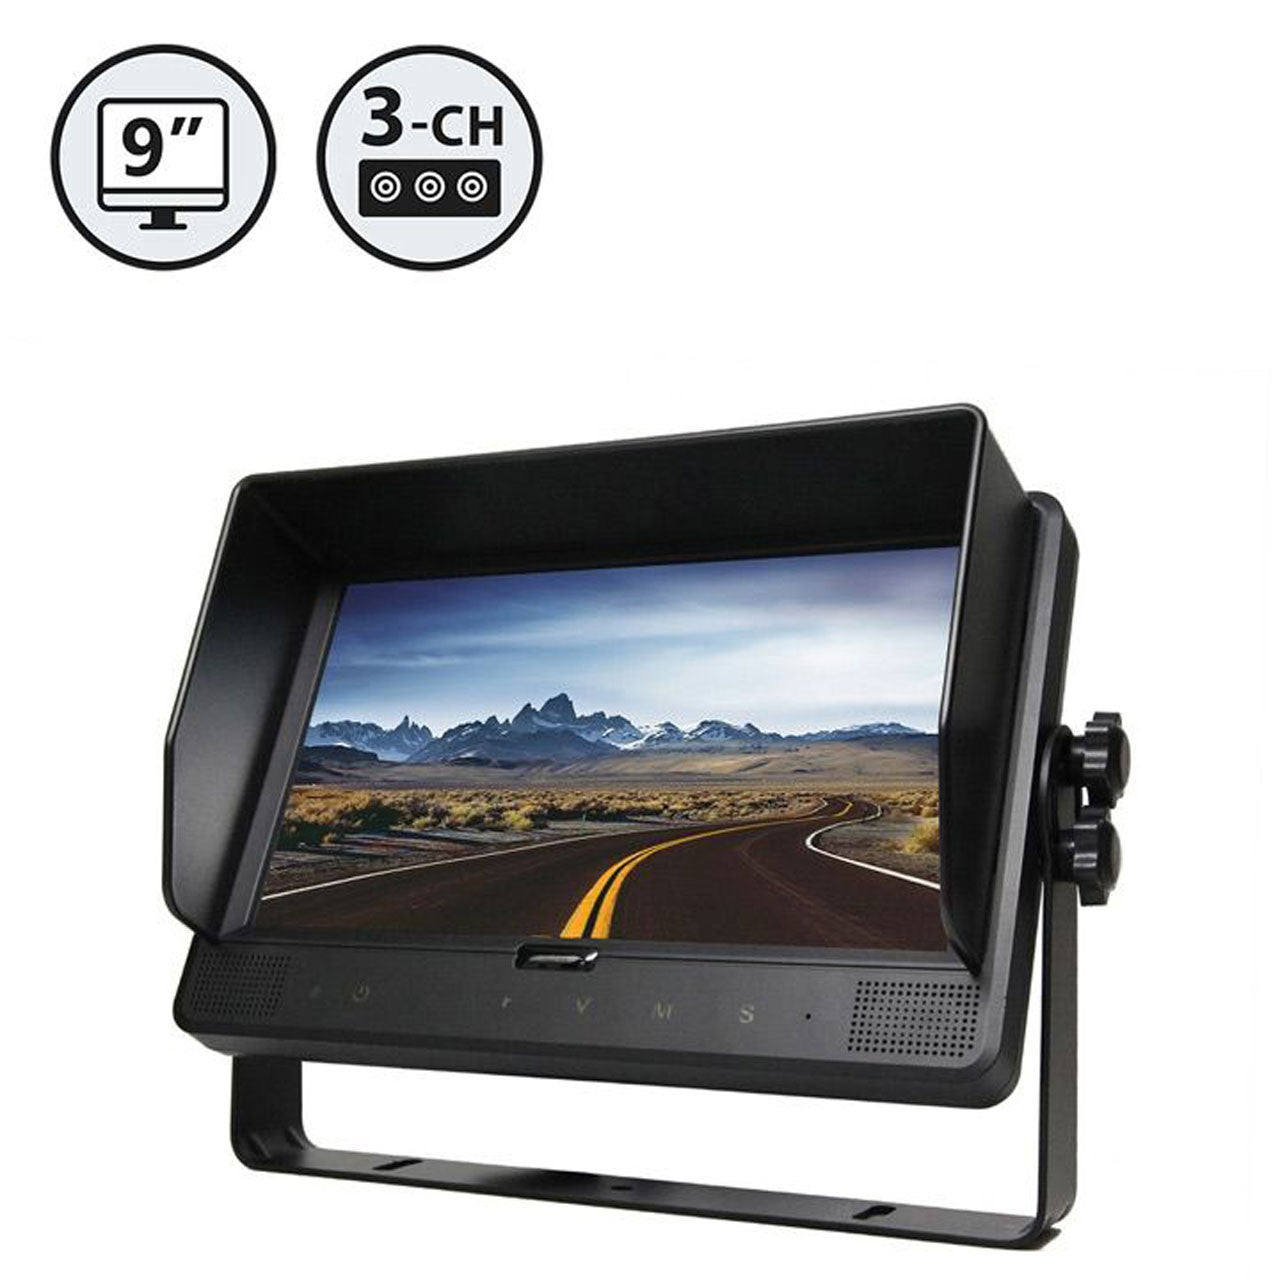 9” TFT LCD Digital Single View Color Monitor (3 Channel)